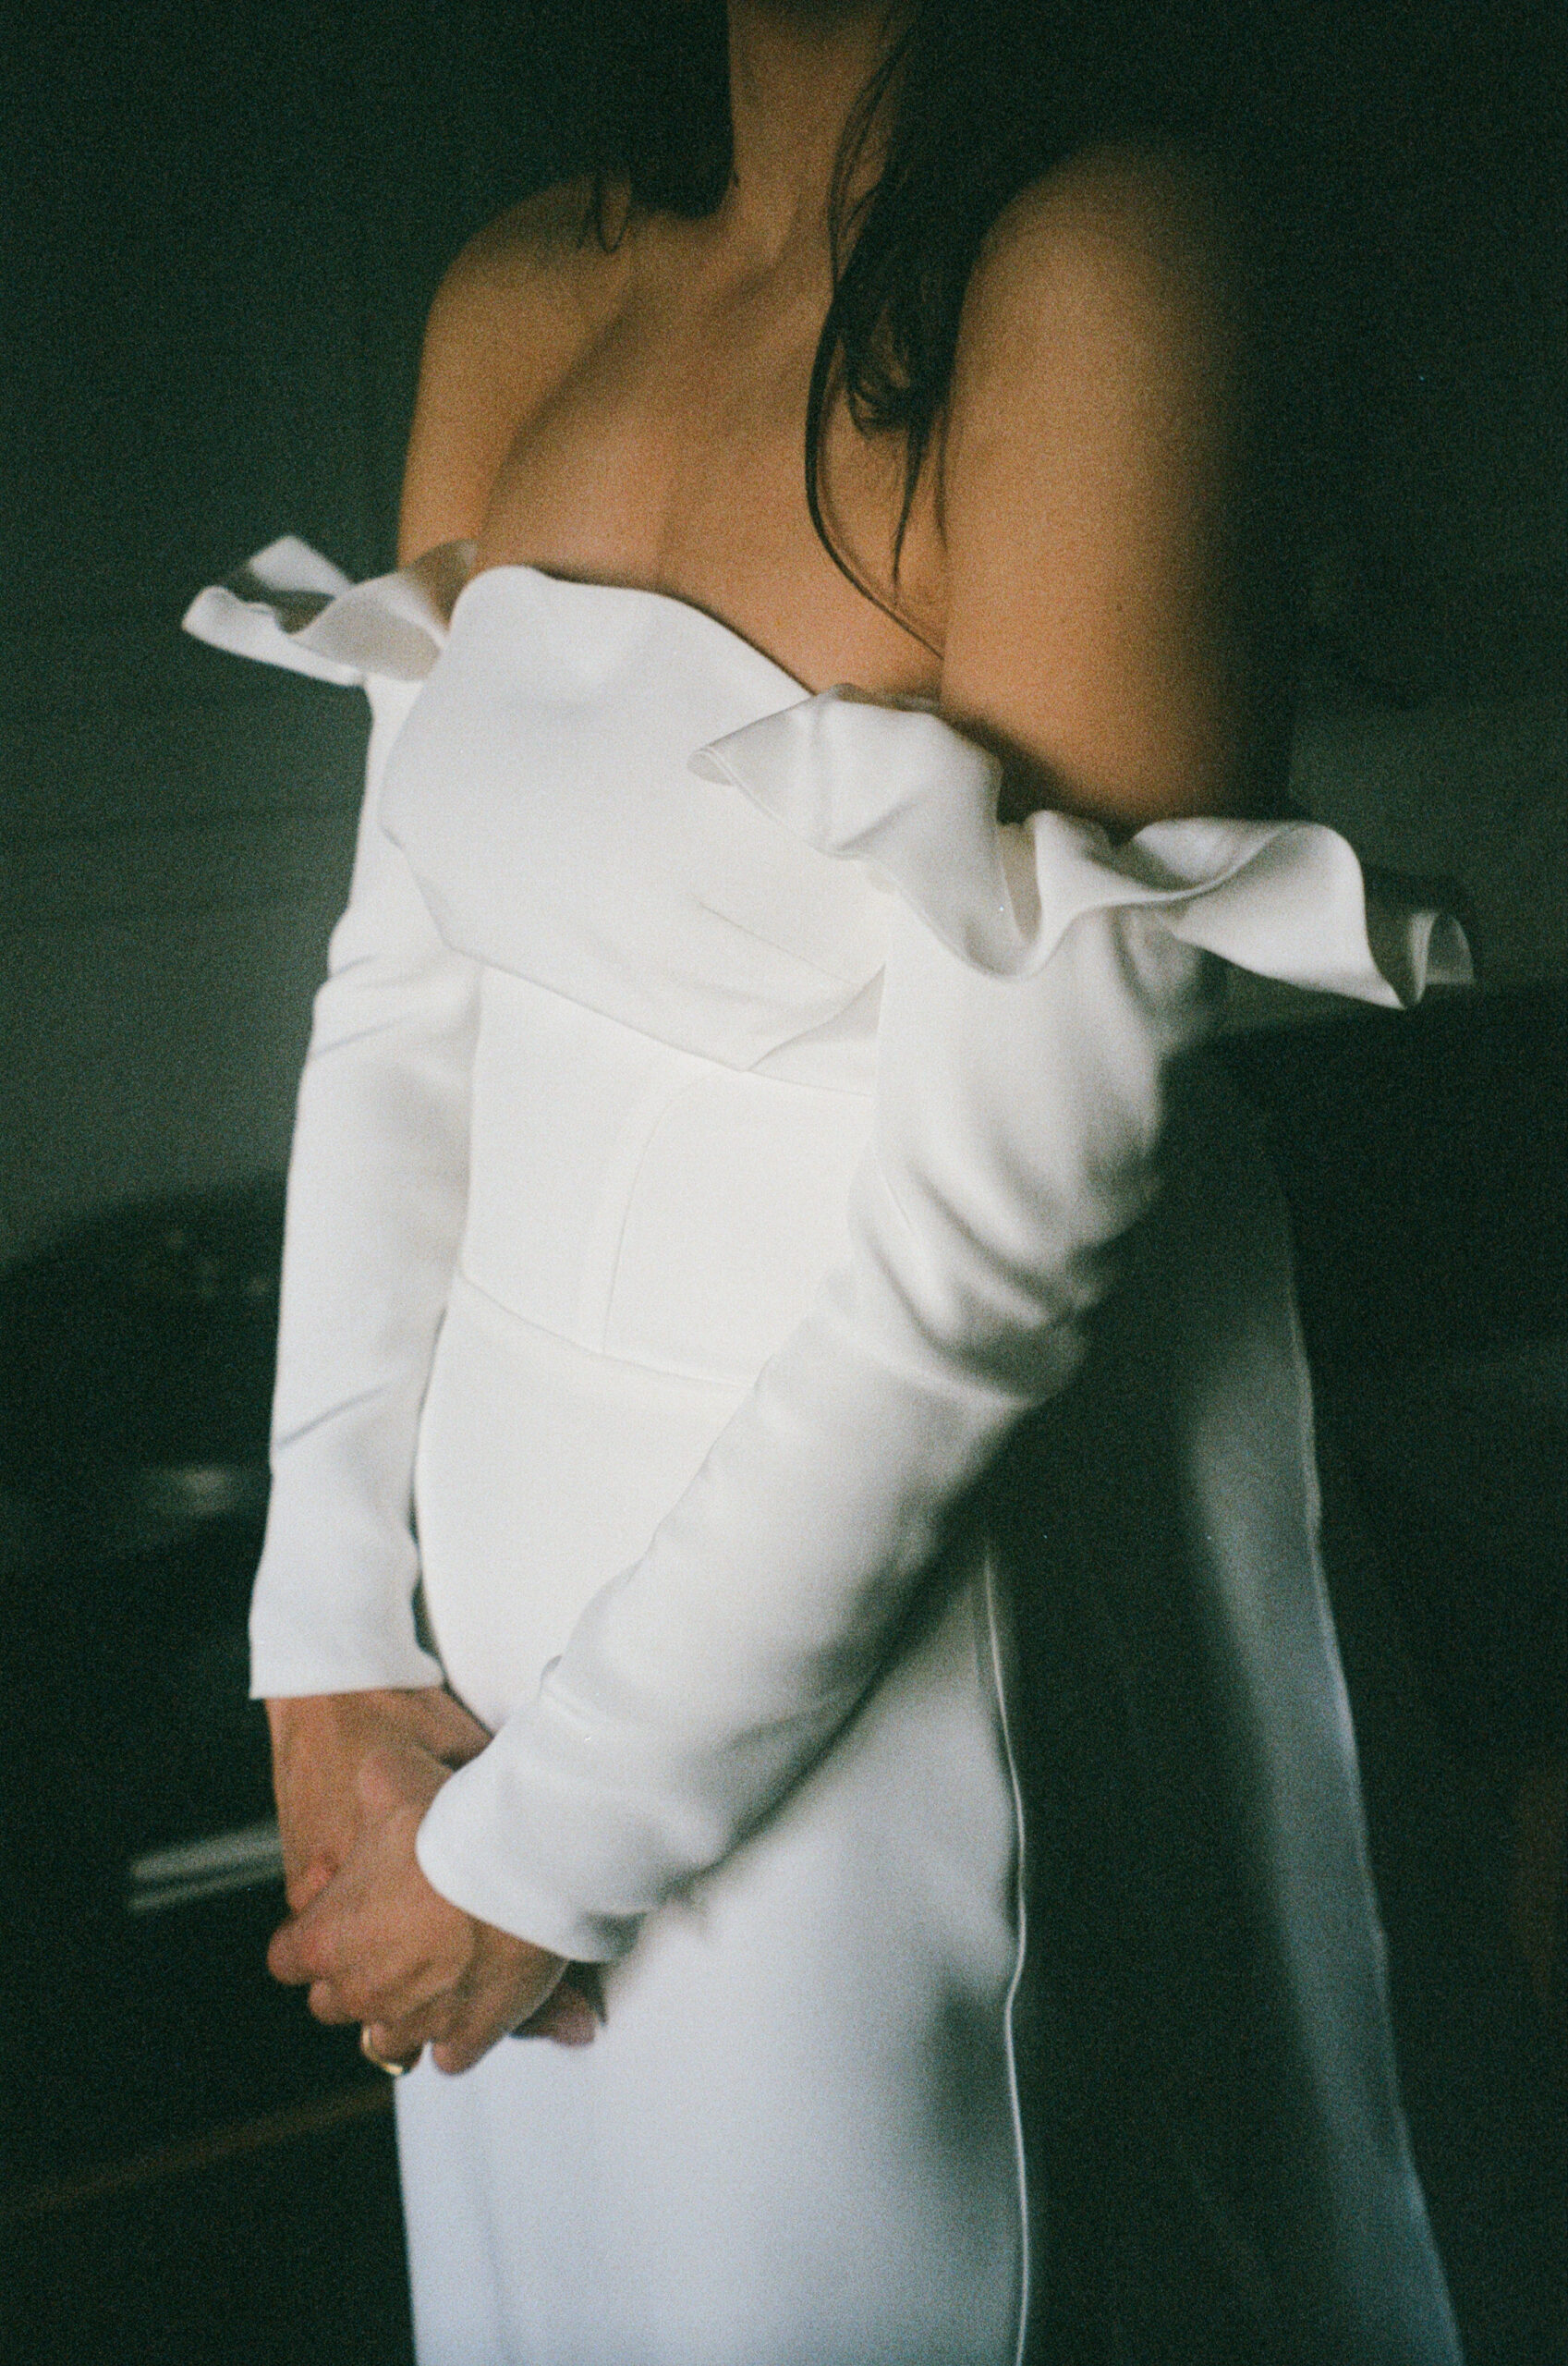 Sarah Seven Wedding dress with custom sleeves on her wedding day in Mexico City, Mexico in film.